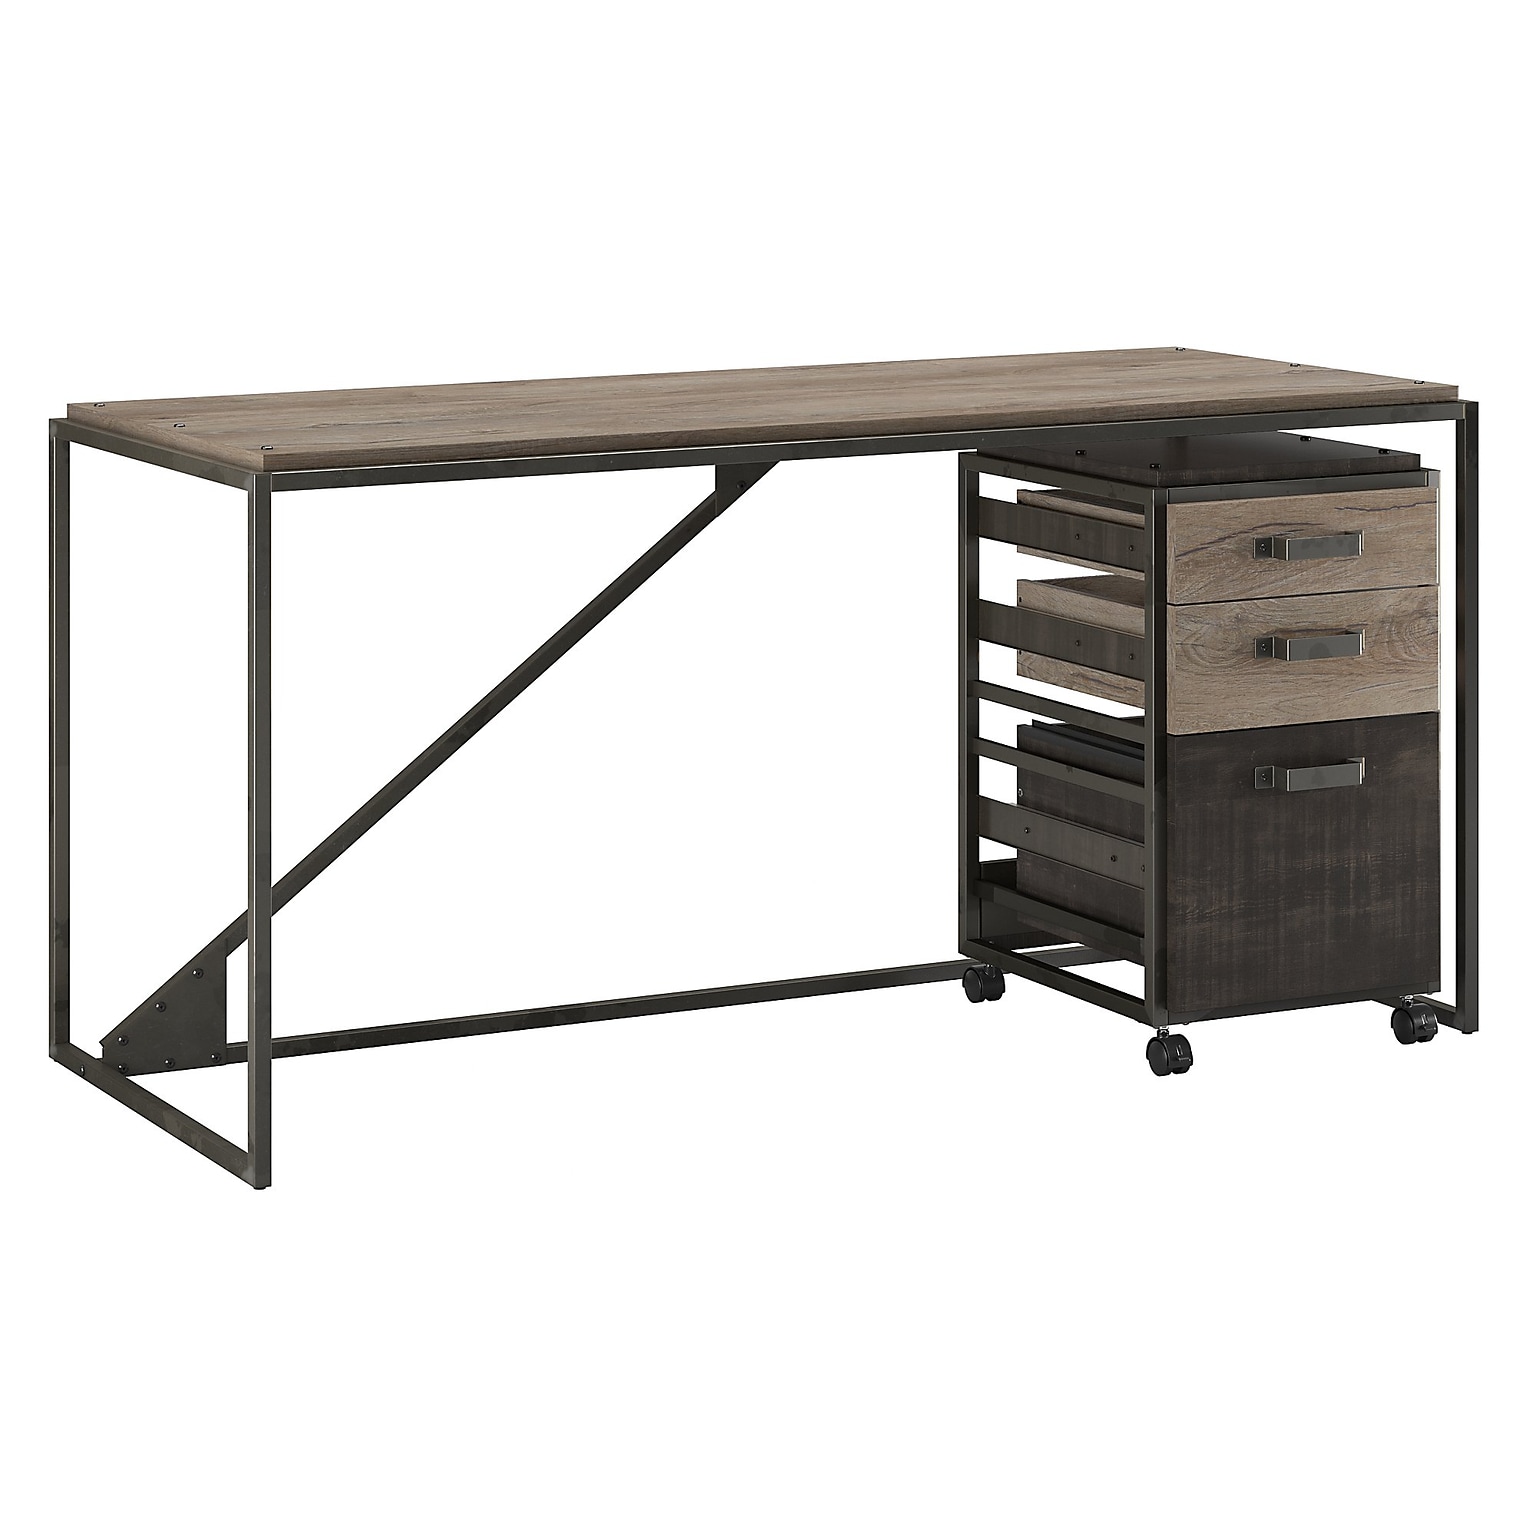 Bush Furniture Refinery 62W Industrial Desk with 3 Drawer Mobile File Cabinet, Rustic Gray/Charred Wood (RFY005RG)